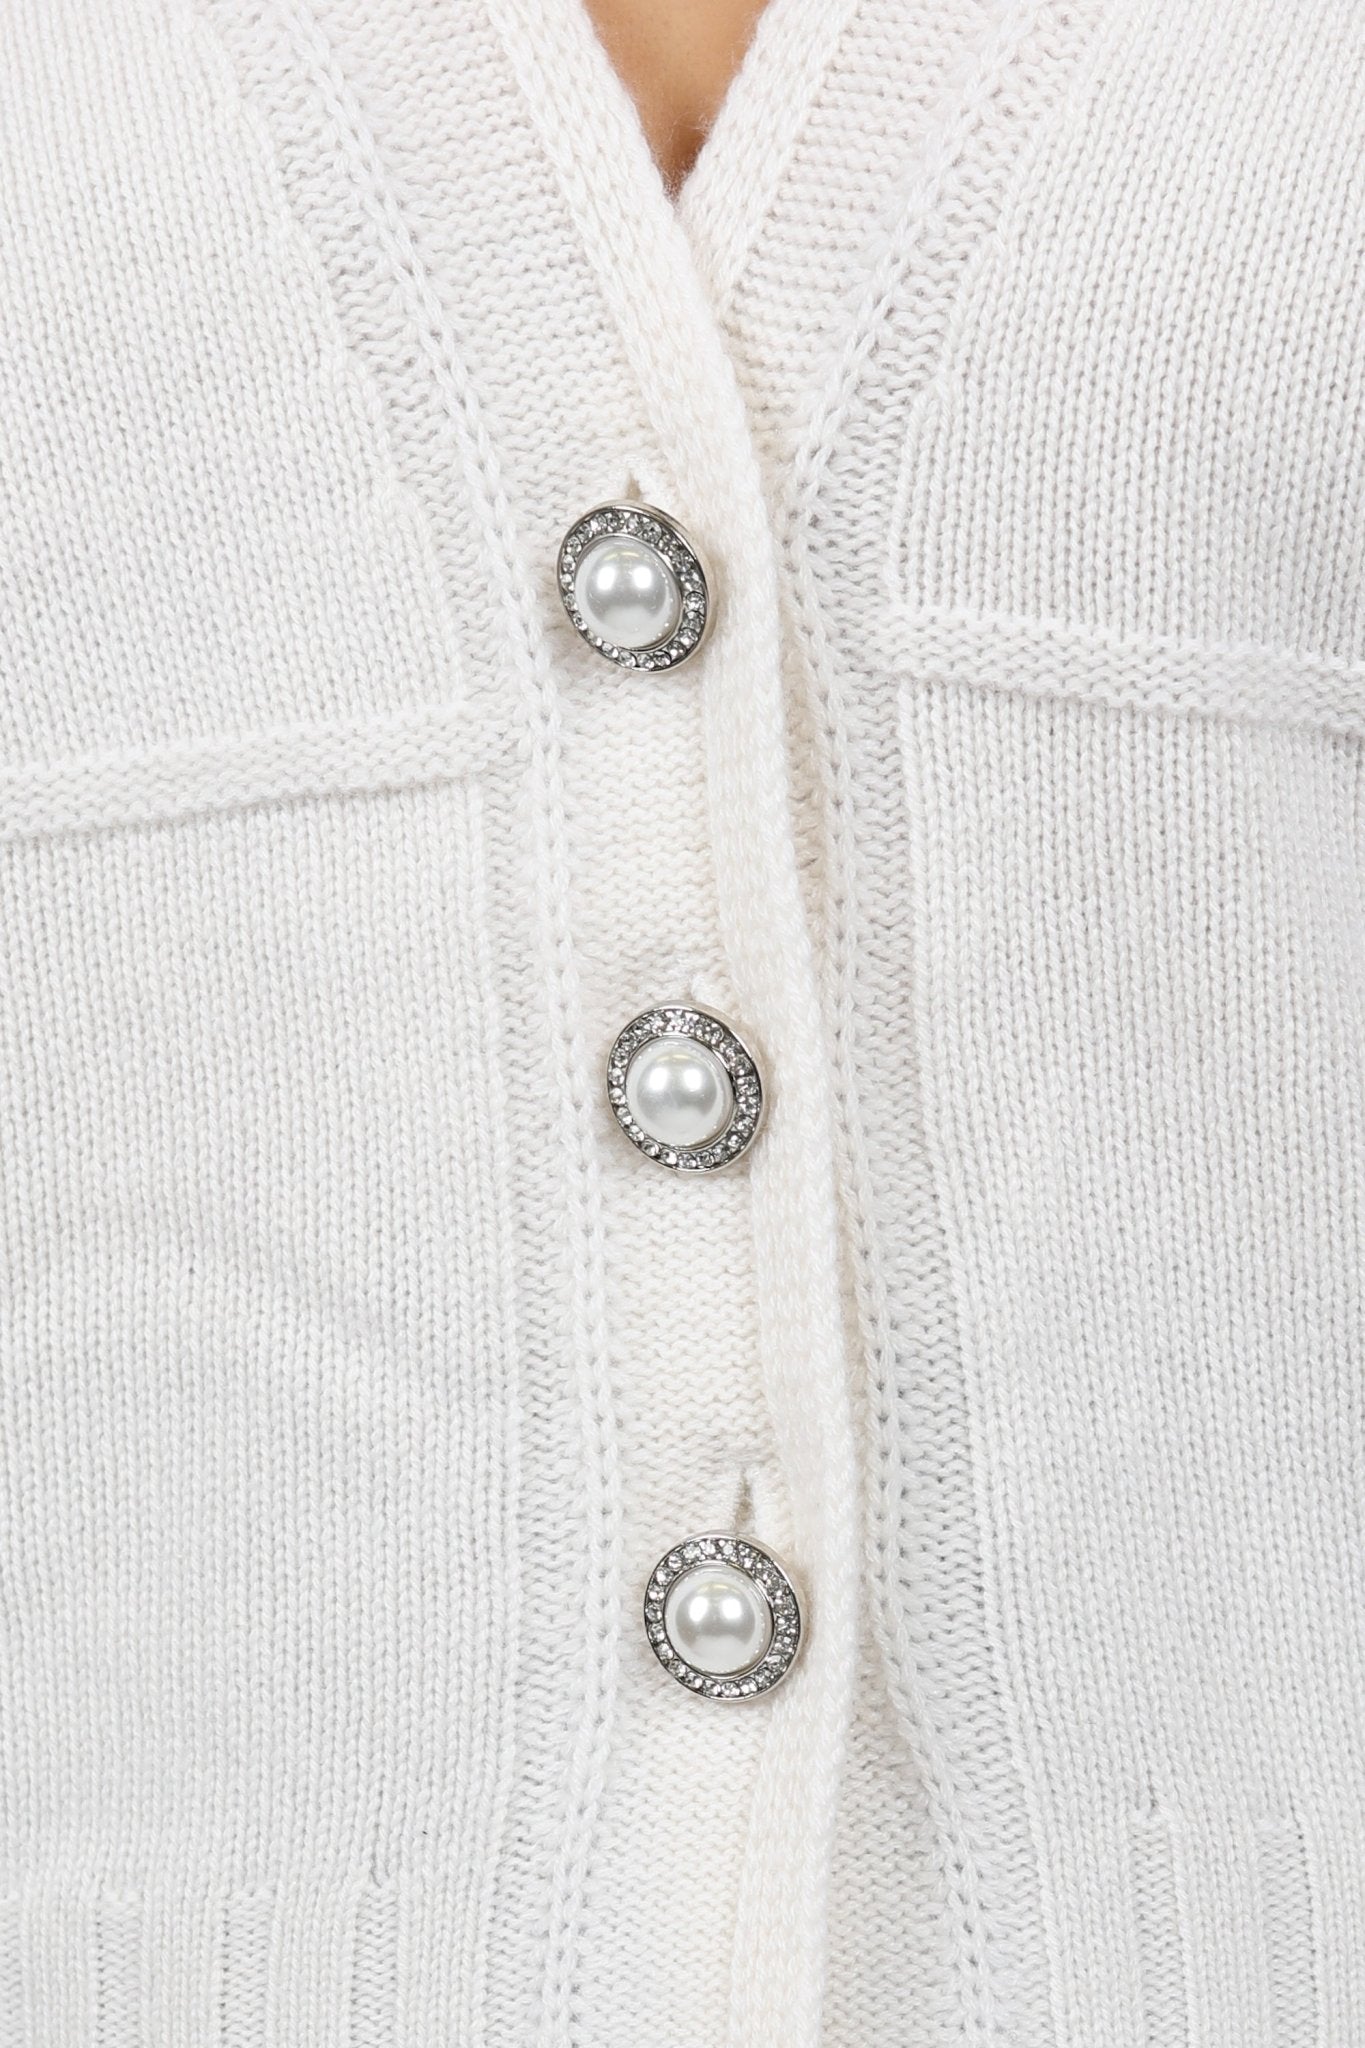 V Neck Cardigan with Pearl Buttons - Autumn Cashmere - Danali - R13560-Chalk-S